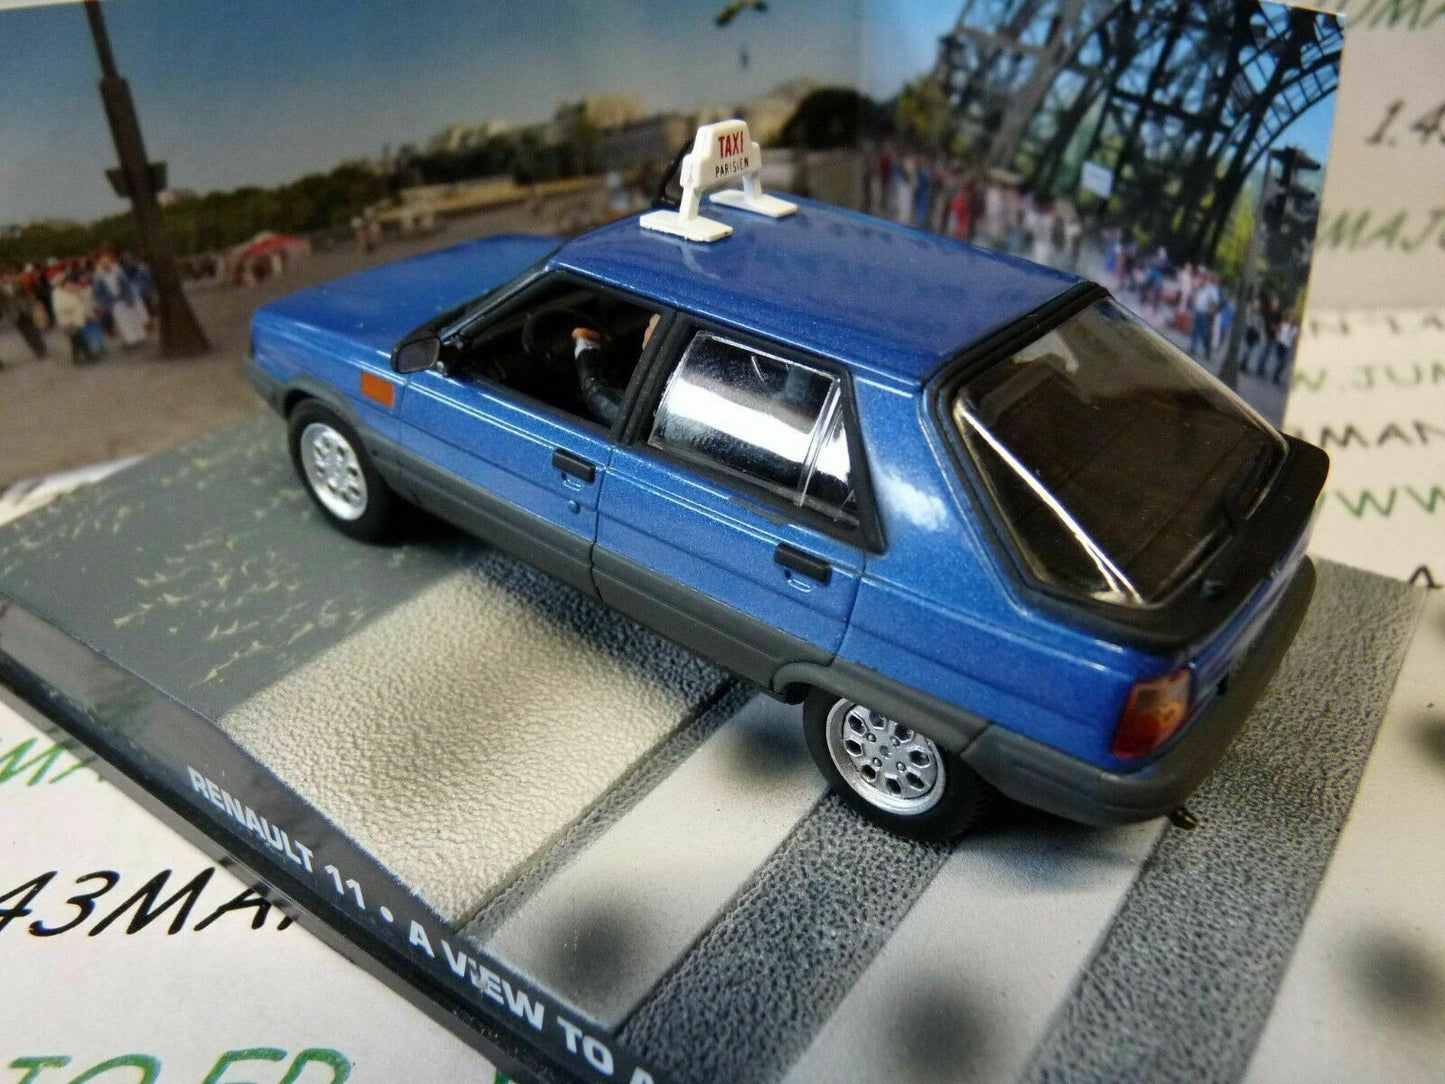 JB53 voiture 1/43 IXO 007 JAMES BOND Renault 11 taxi a view to kill